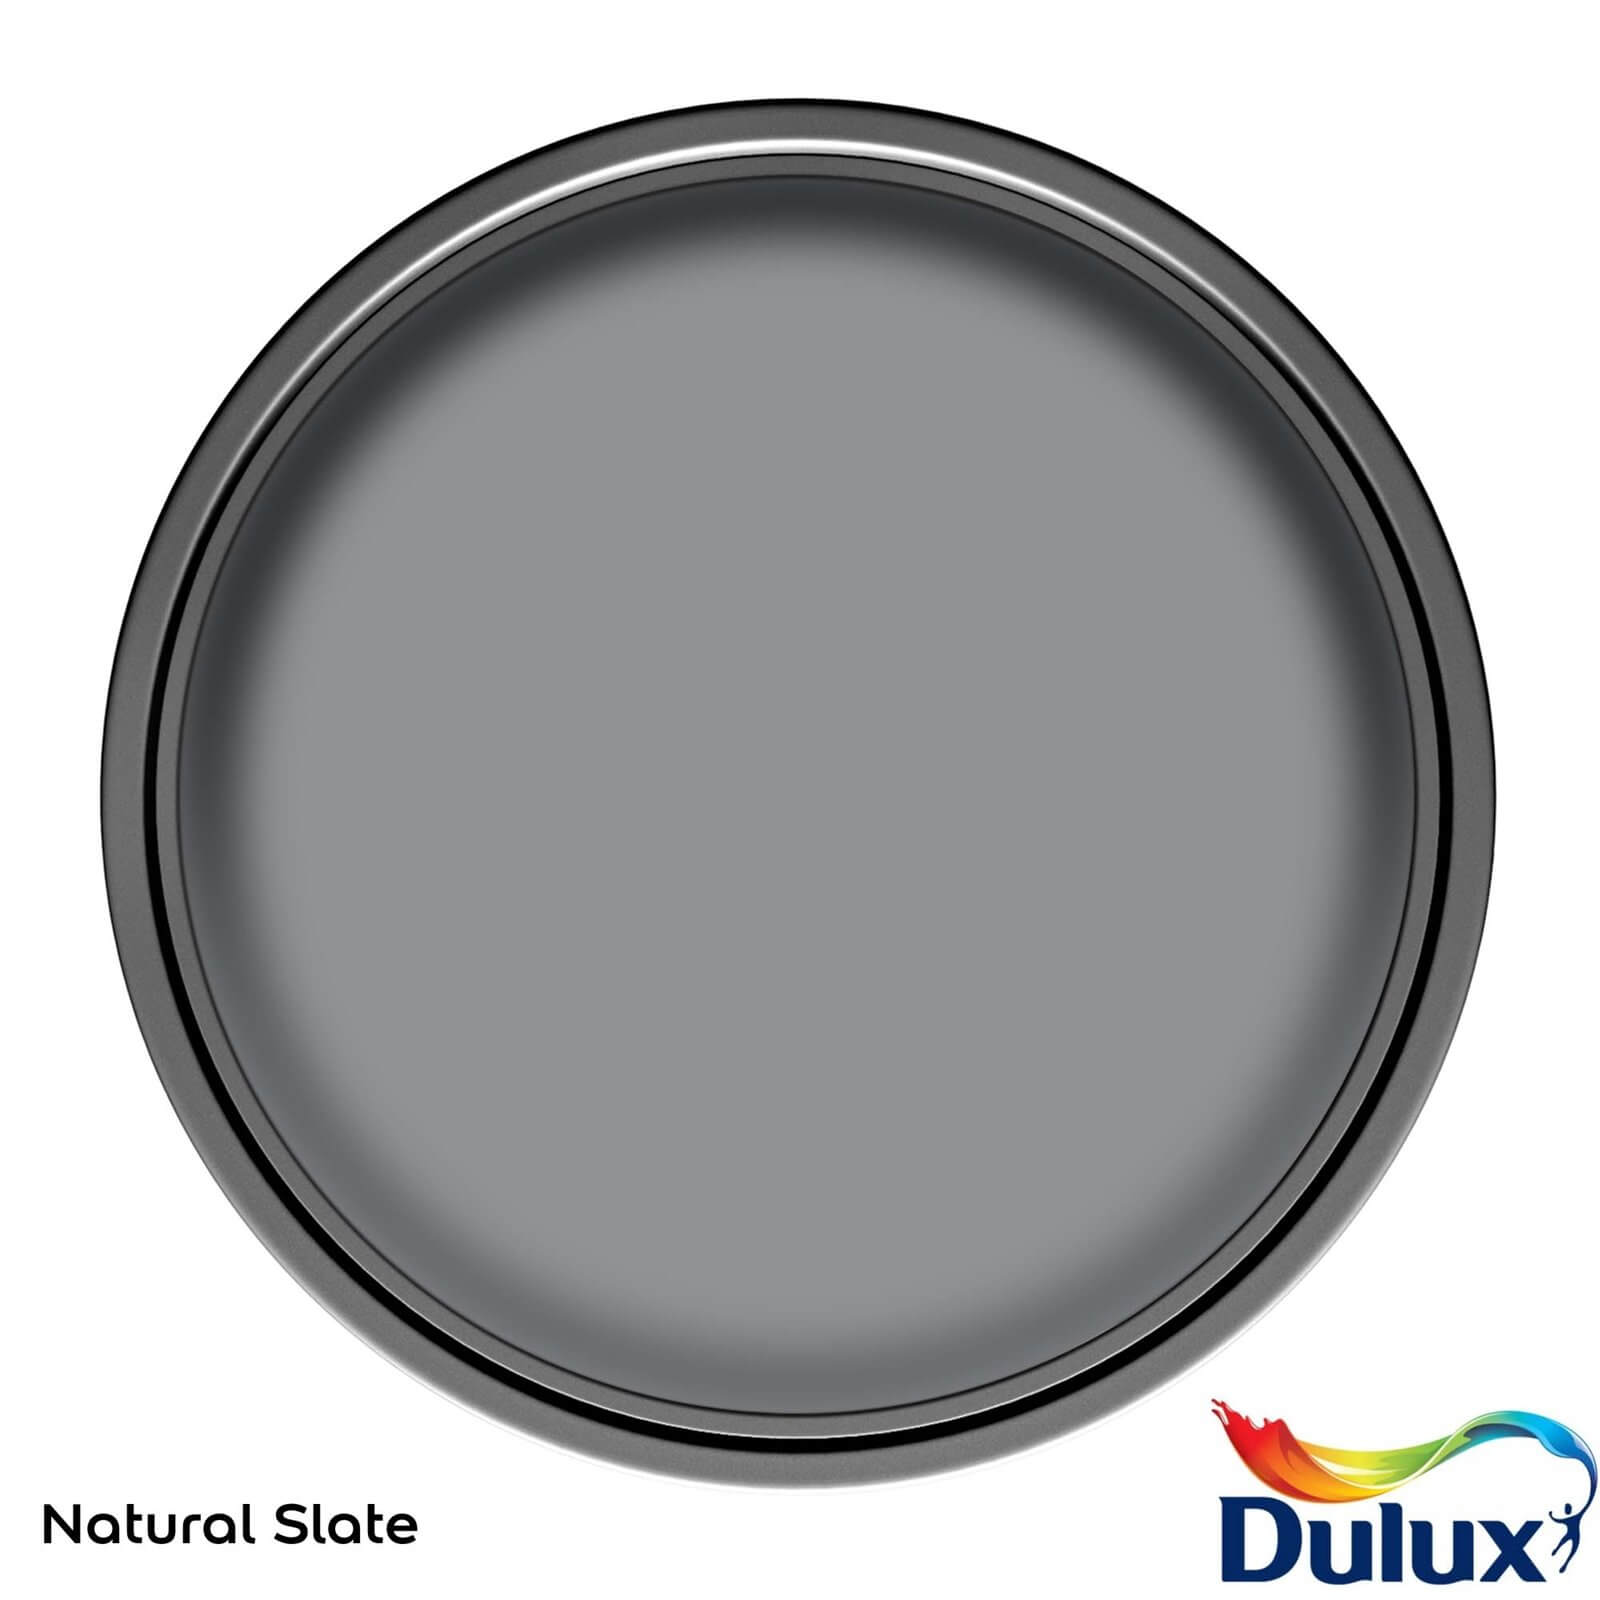 Dulux Quick Dry Satinwood Paint Natural Slate - 750ml